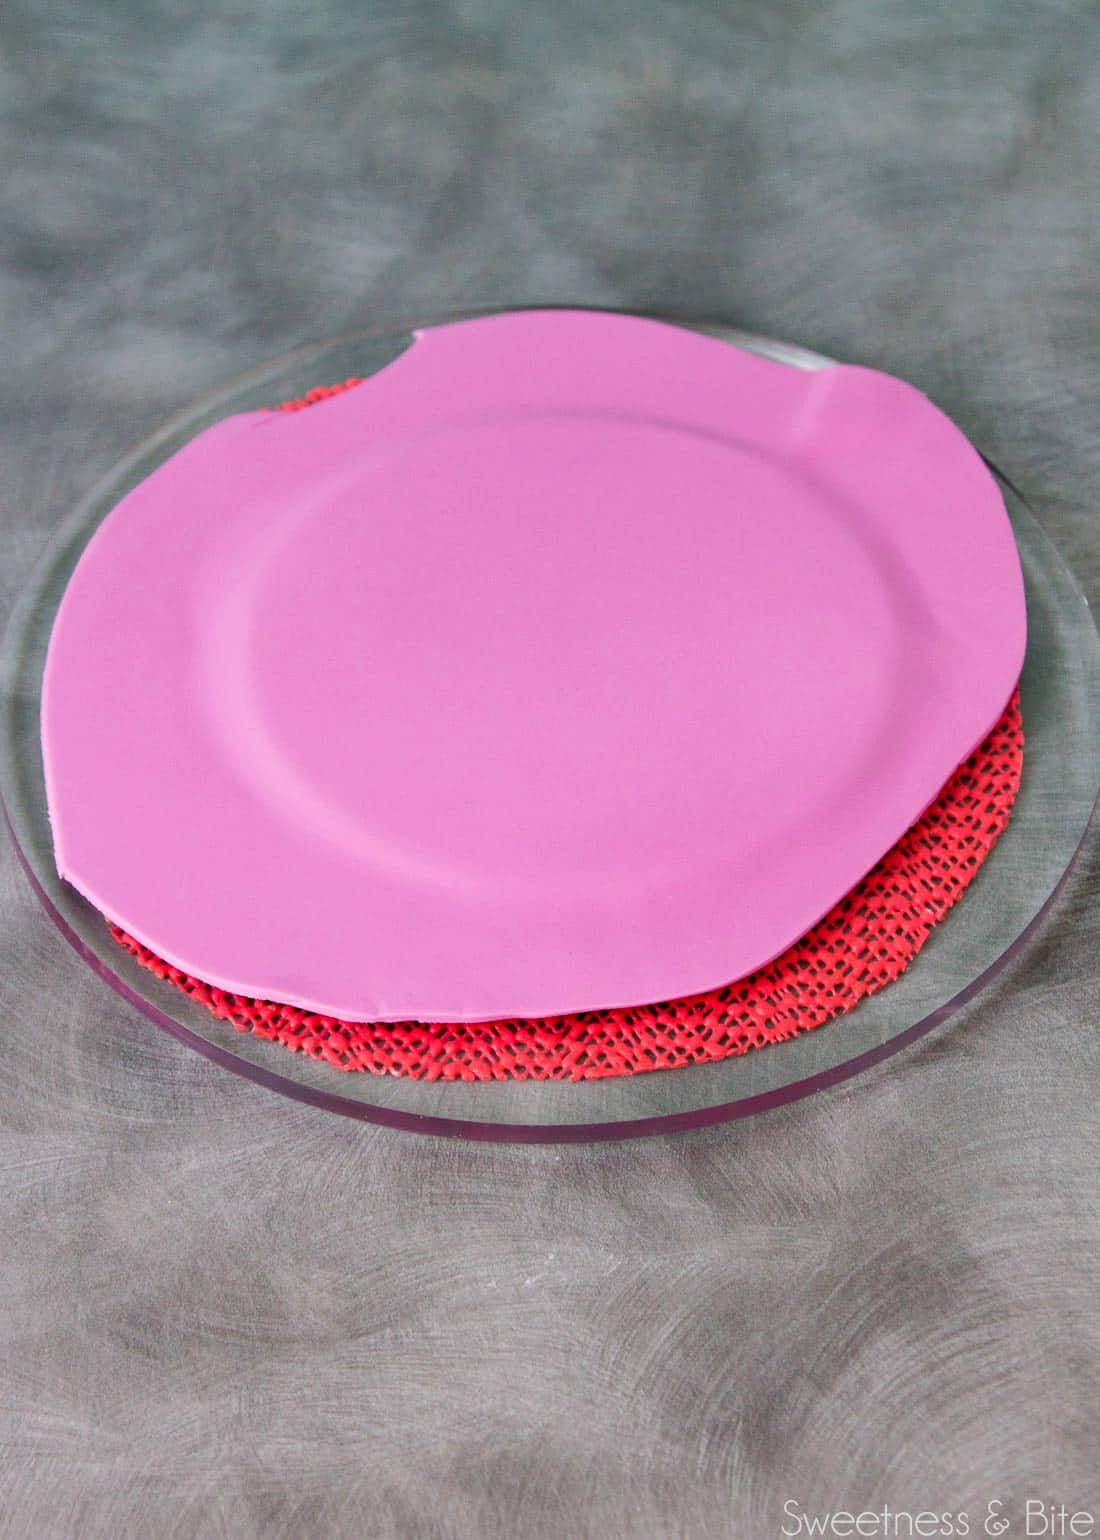 Purple fondant covering a small round cake card.